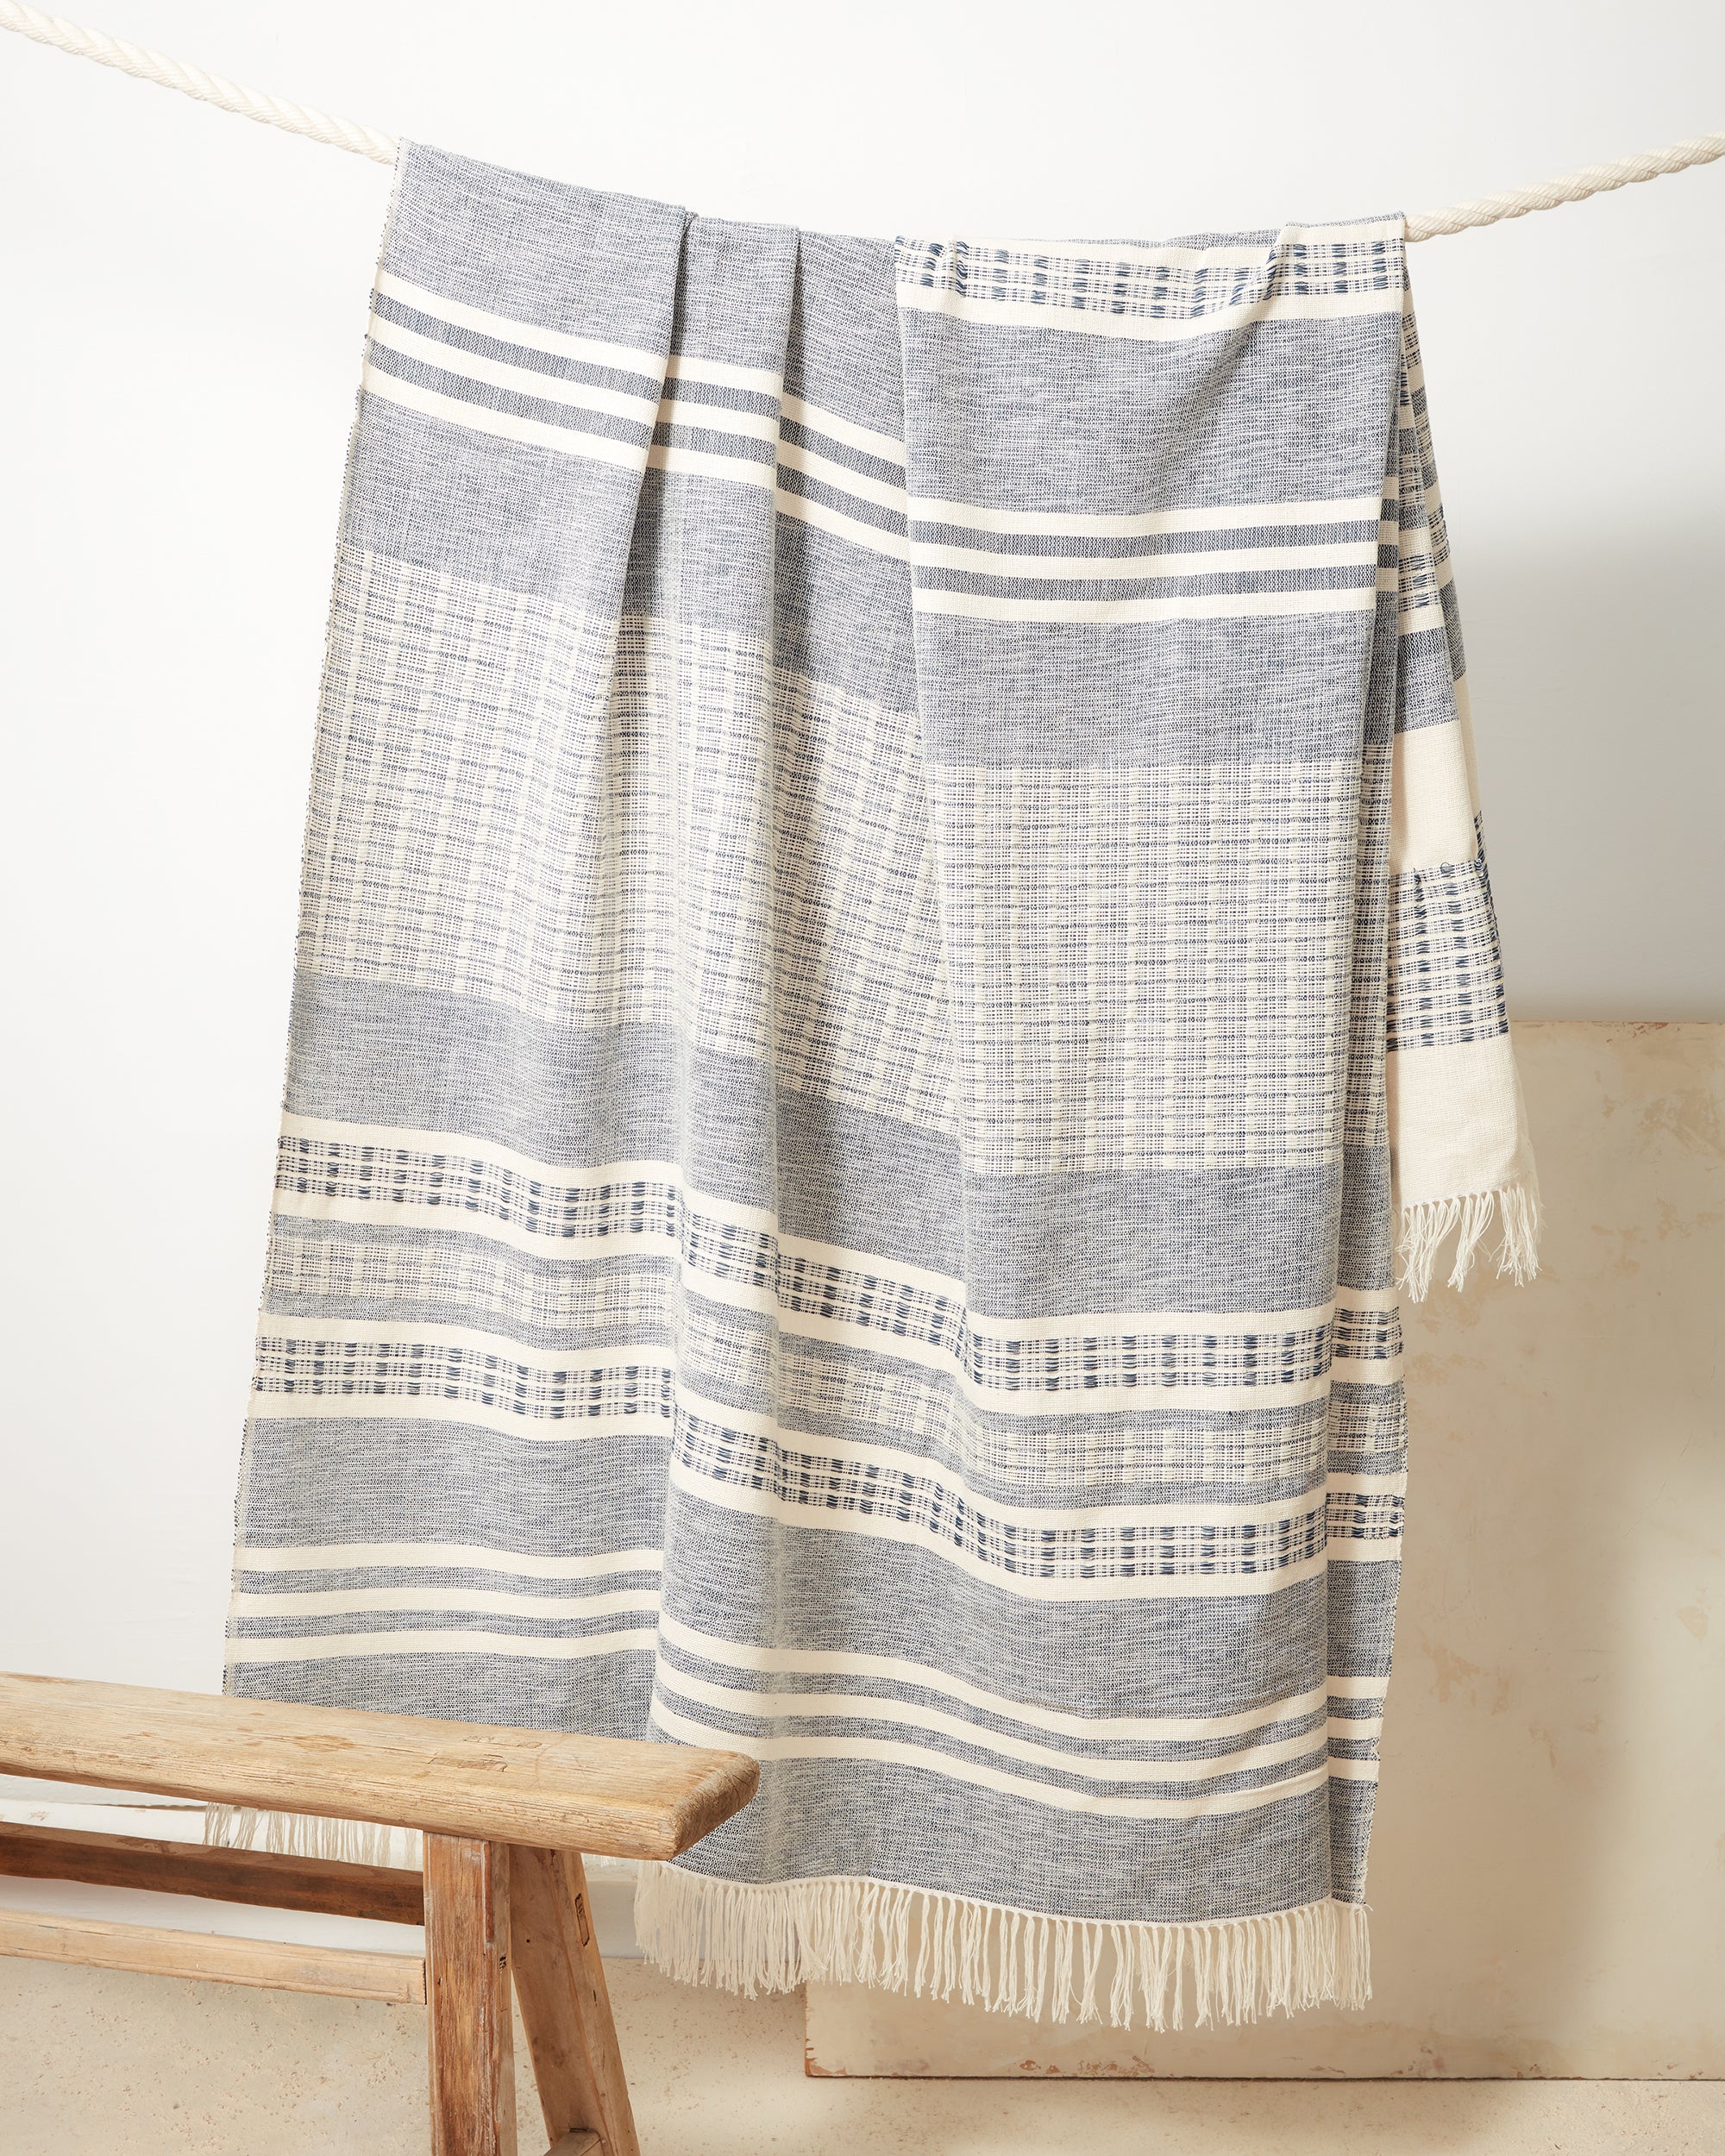 Ethically handwoven cotton throw blanket, picnic blanket, blue and white